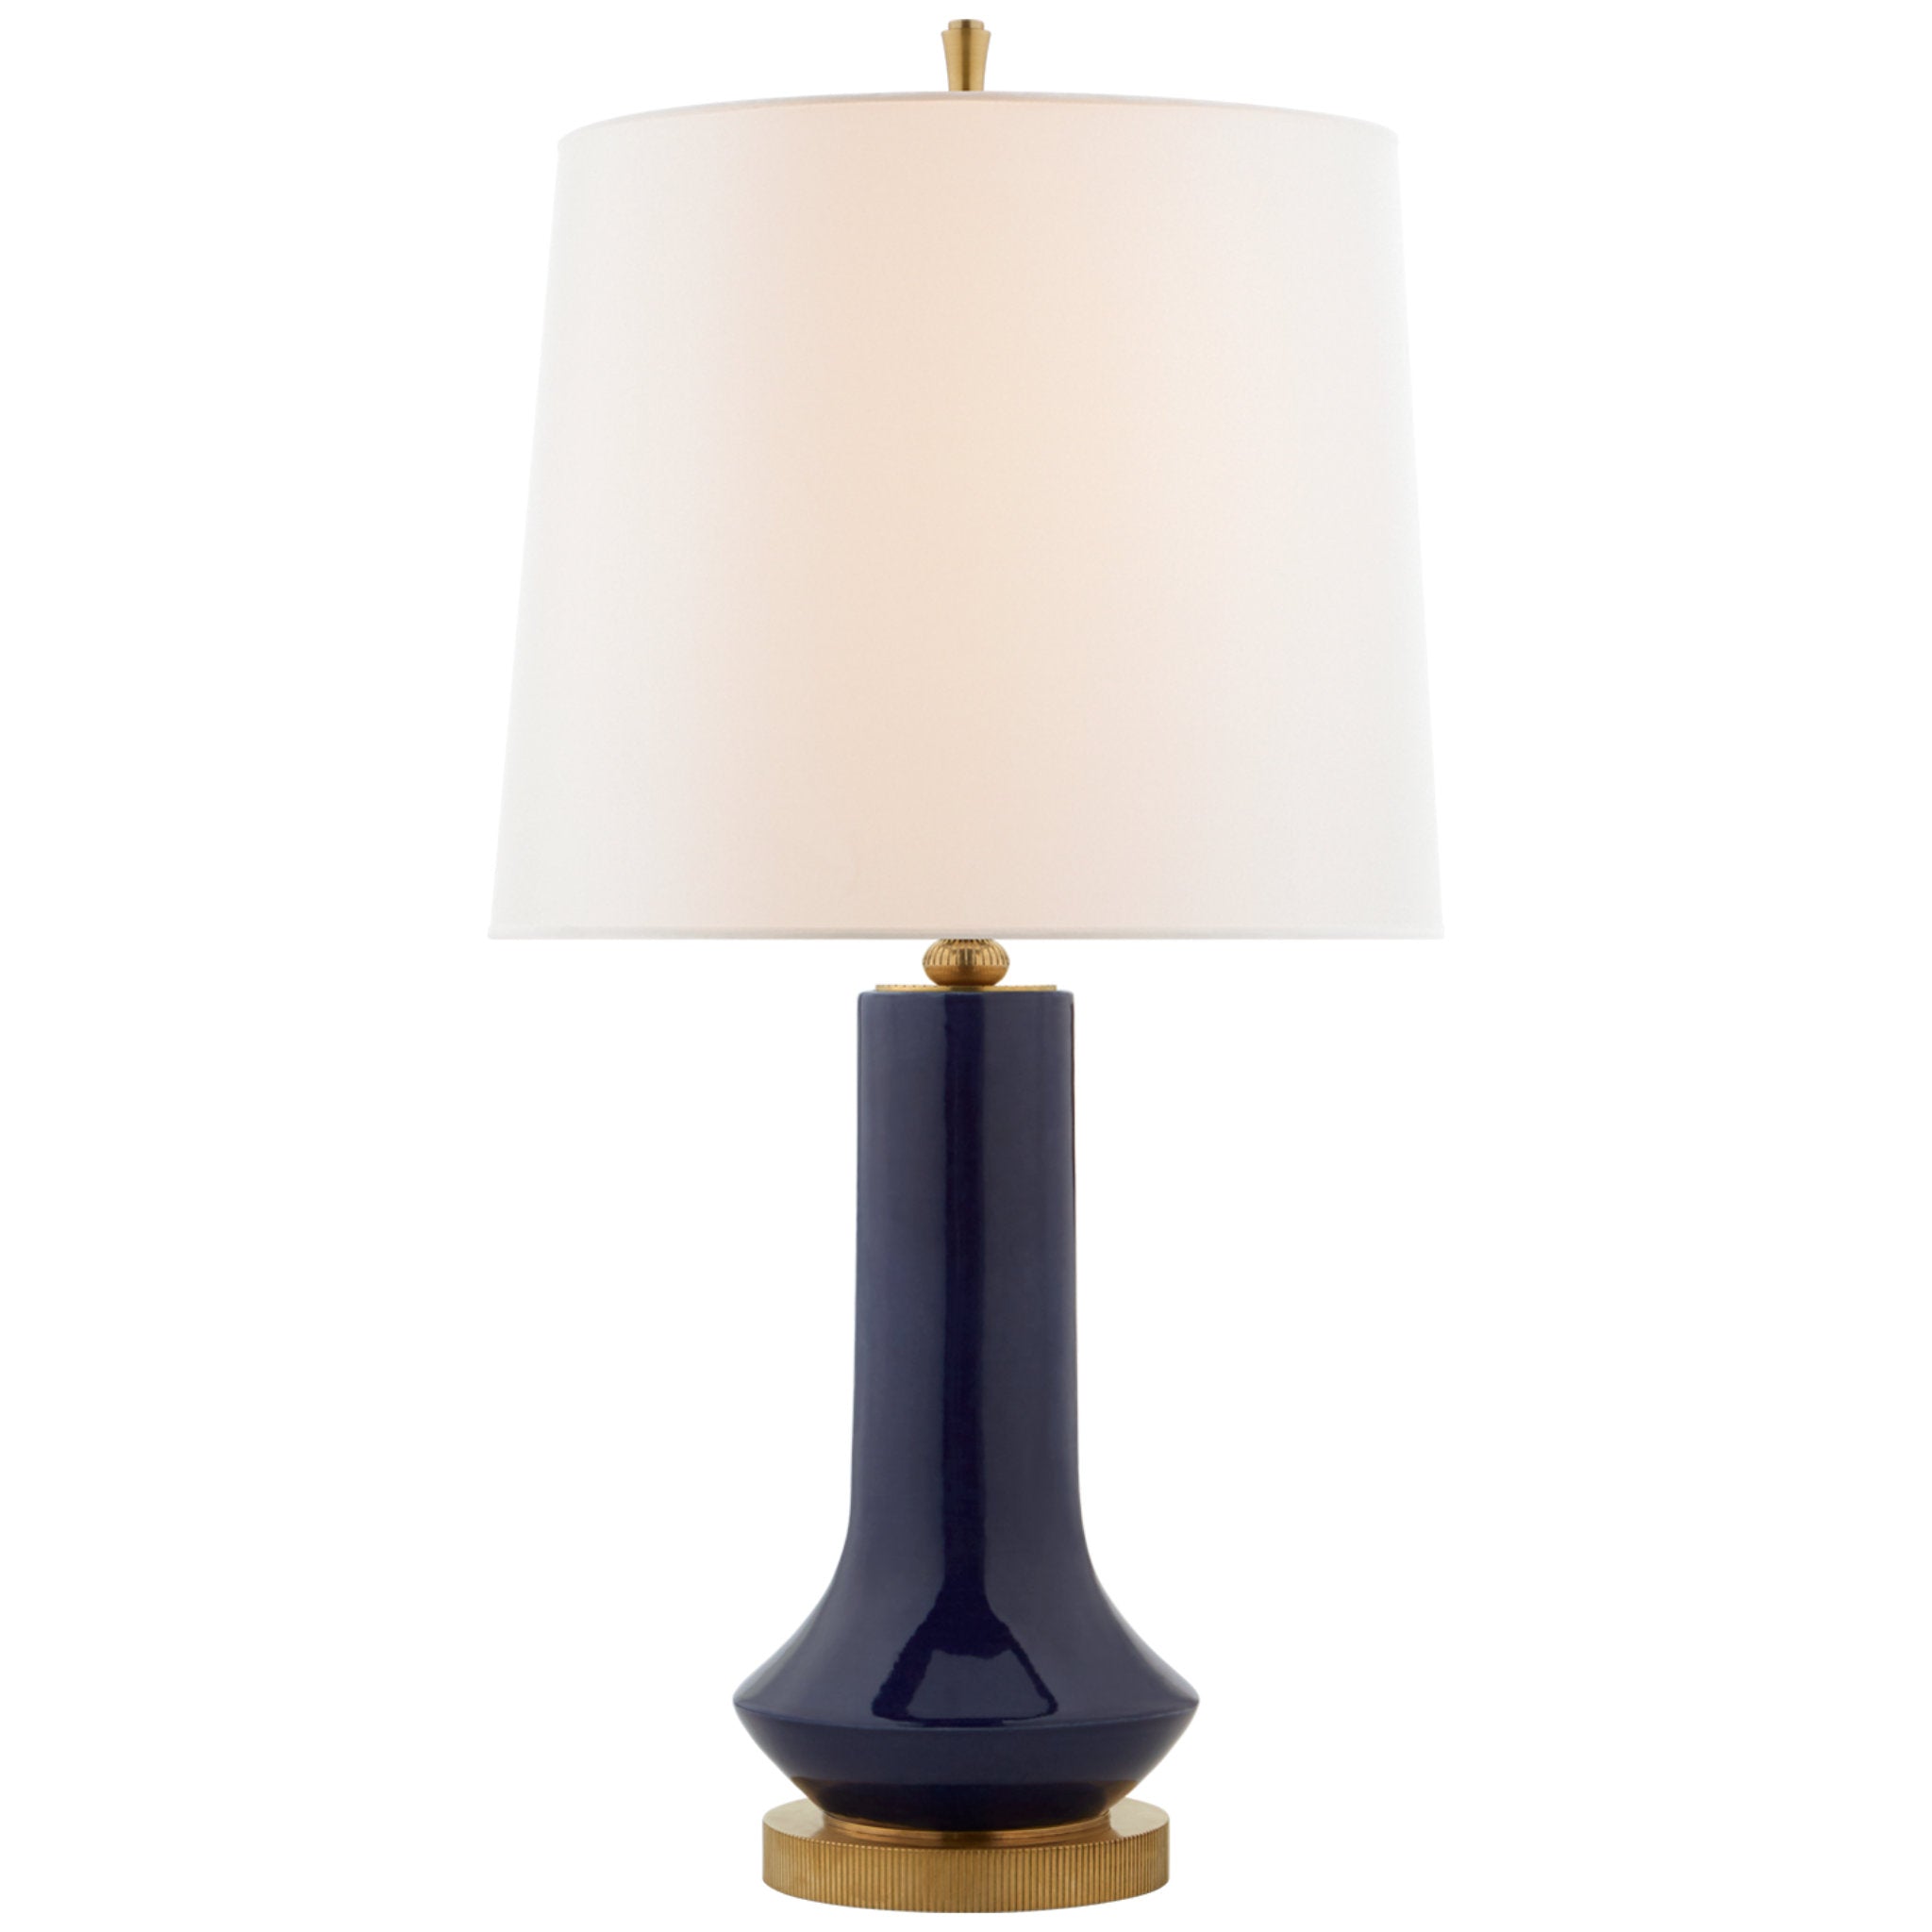 Thomas O'Brien Luisa Large Table Lamp in Denim with Linen Shade